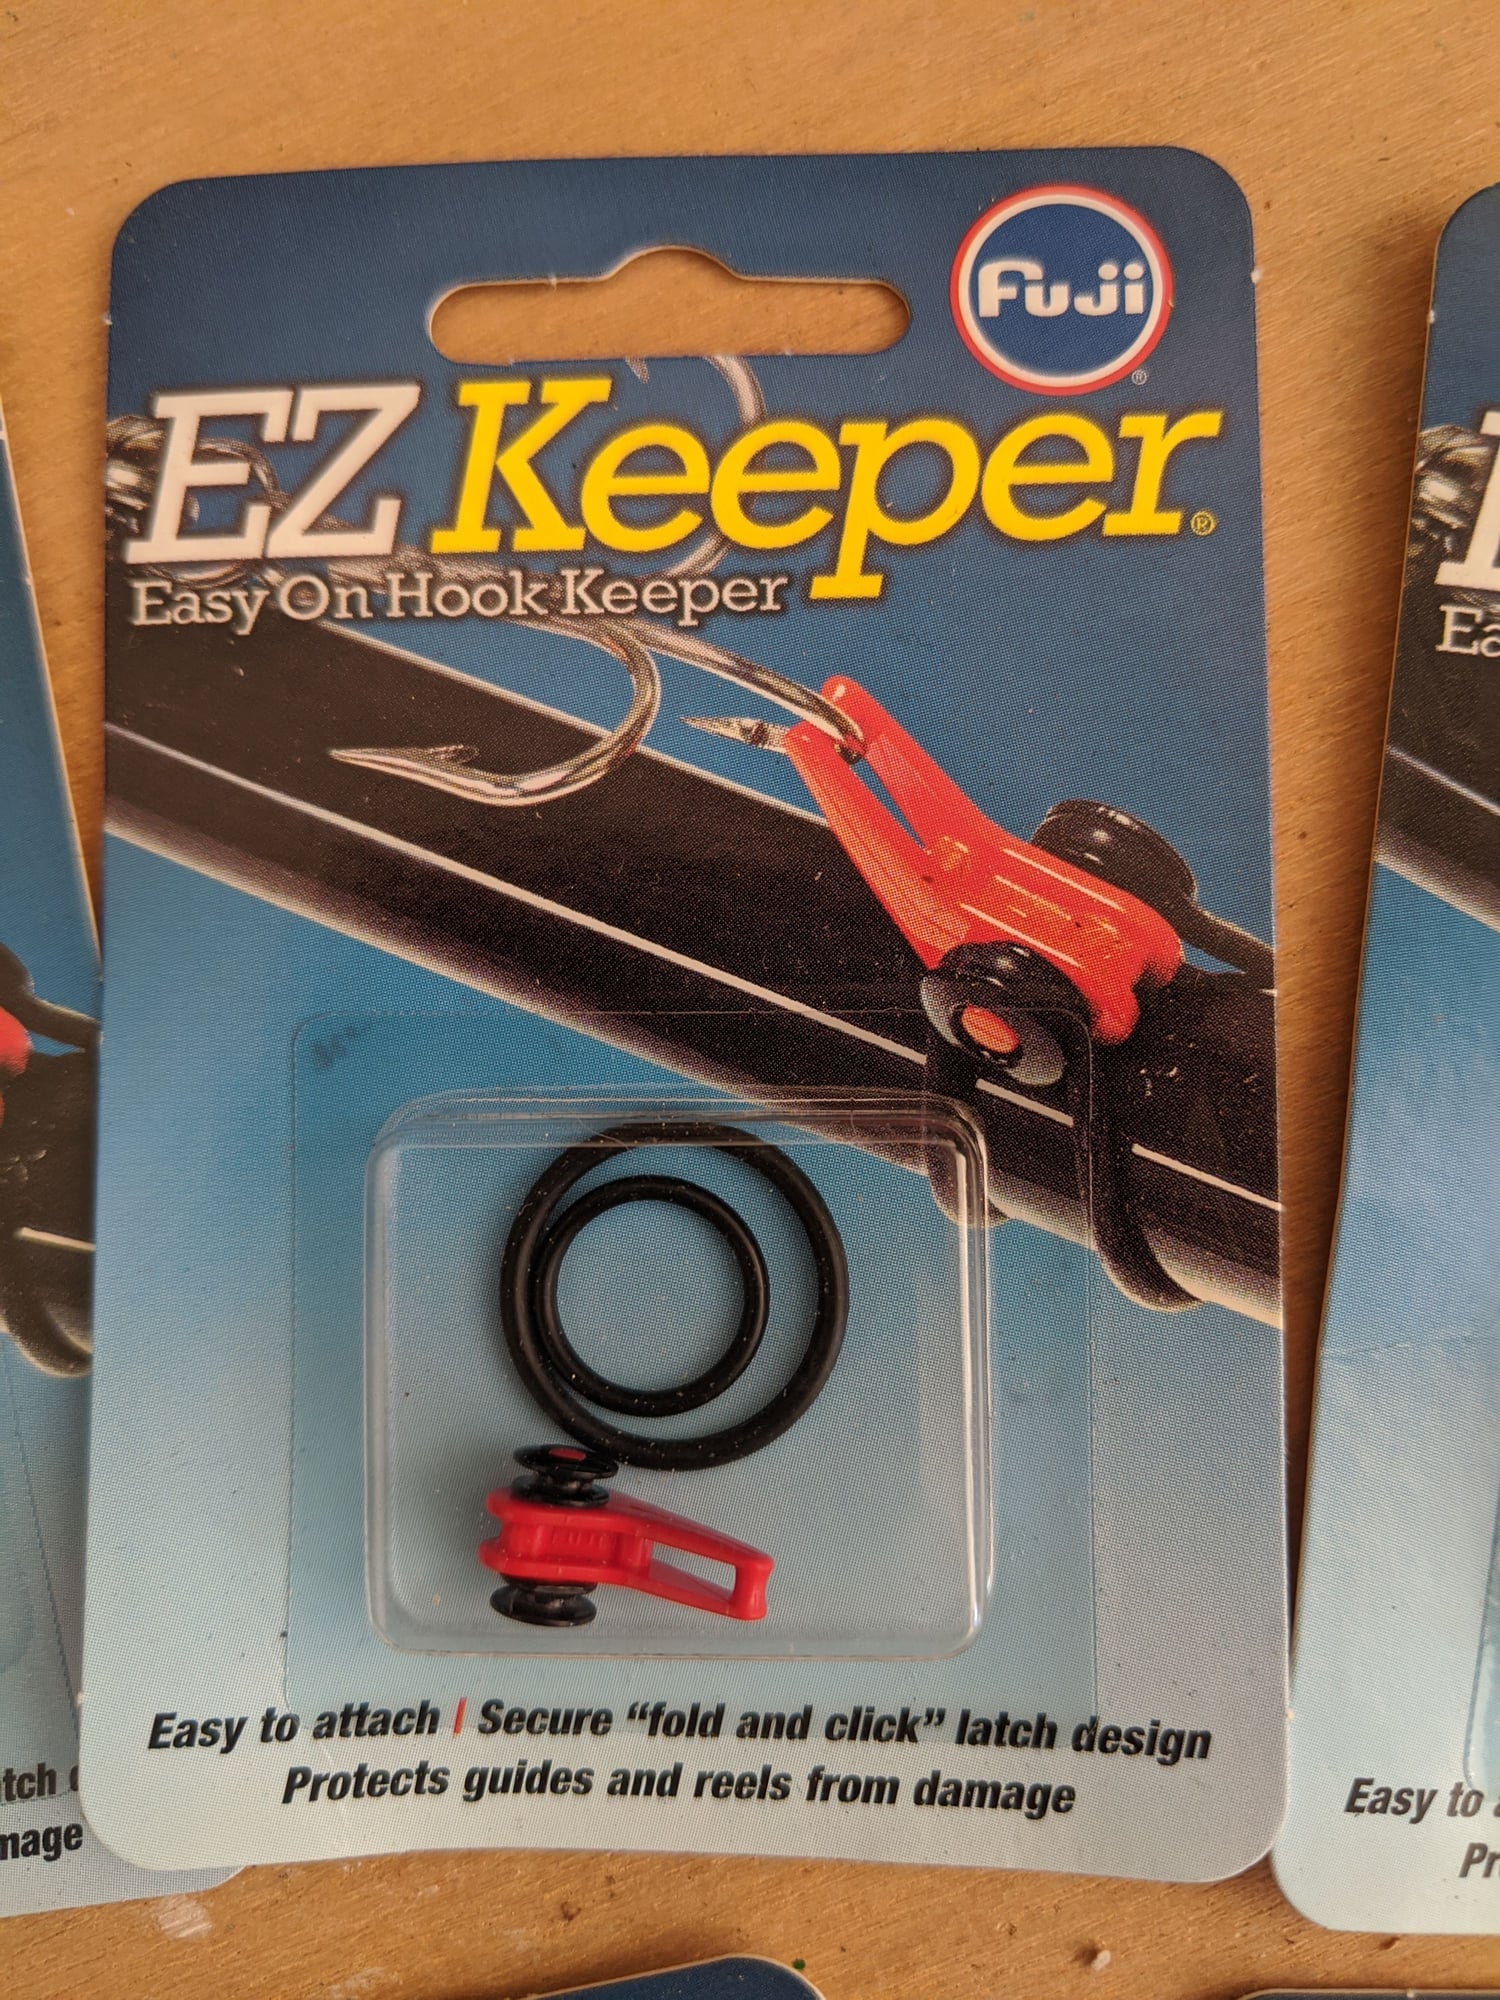 SOLD---9 NEW Fuji EZ Keeper Hook Keppers - The Hull Truth